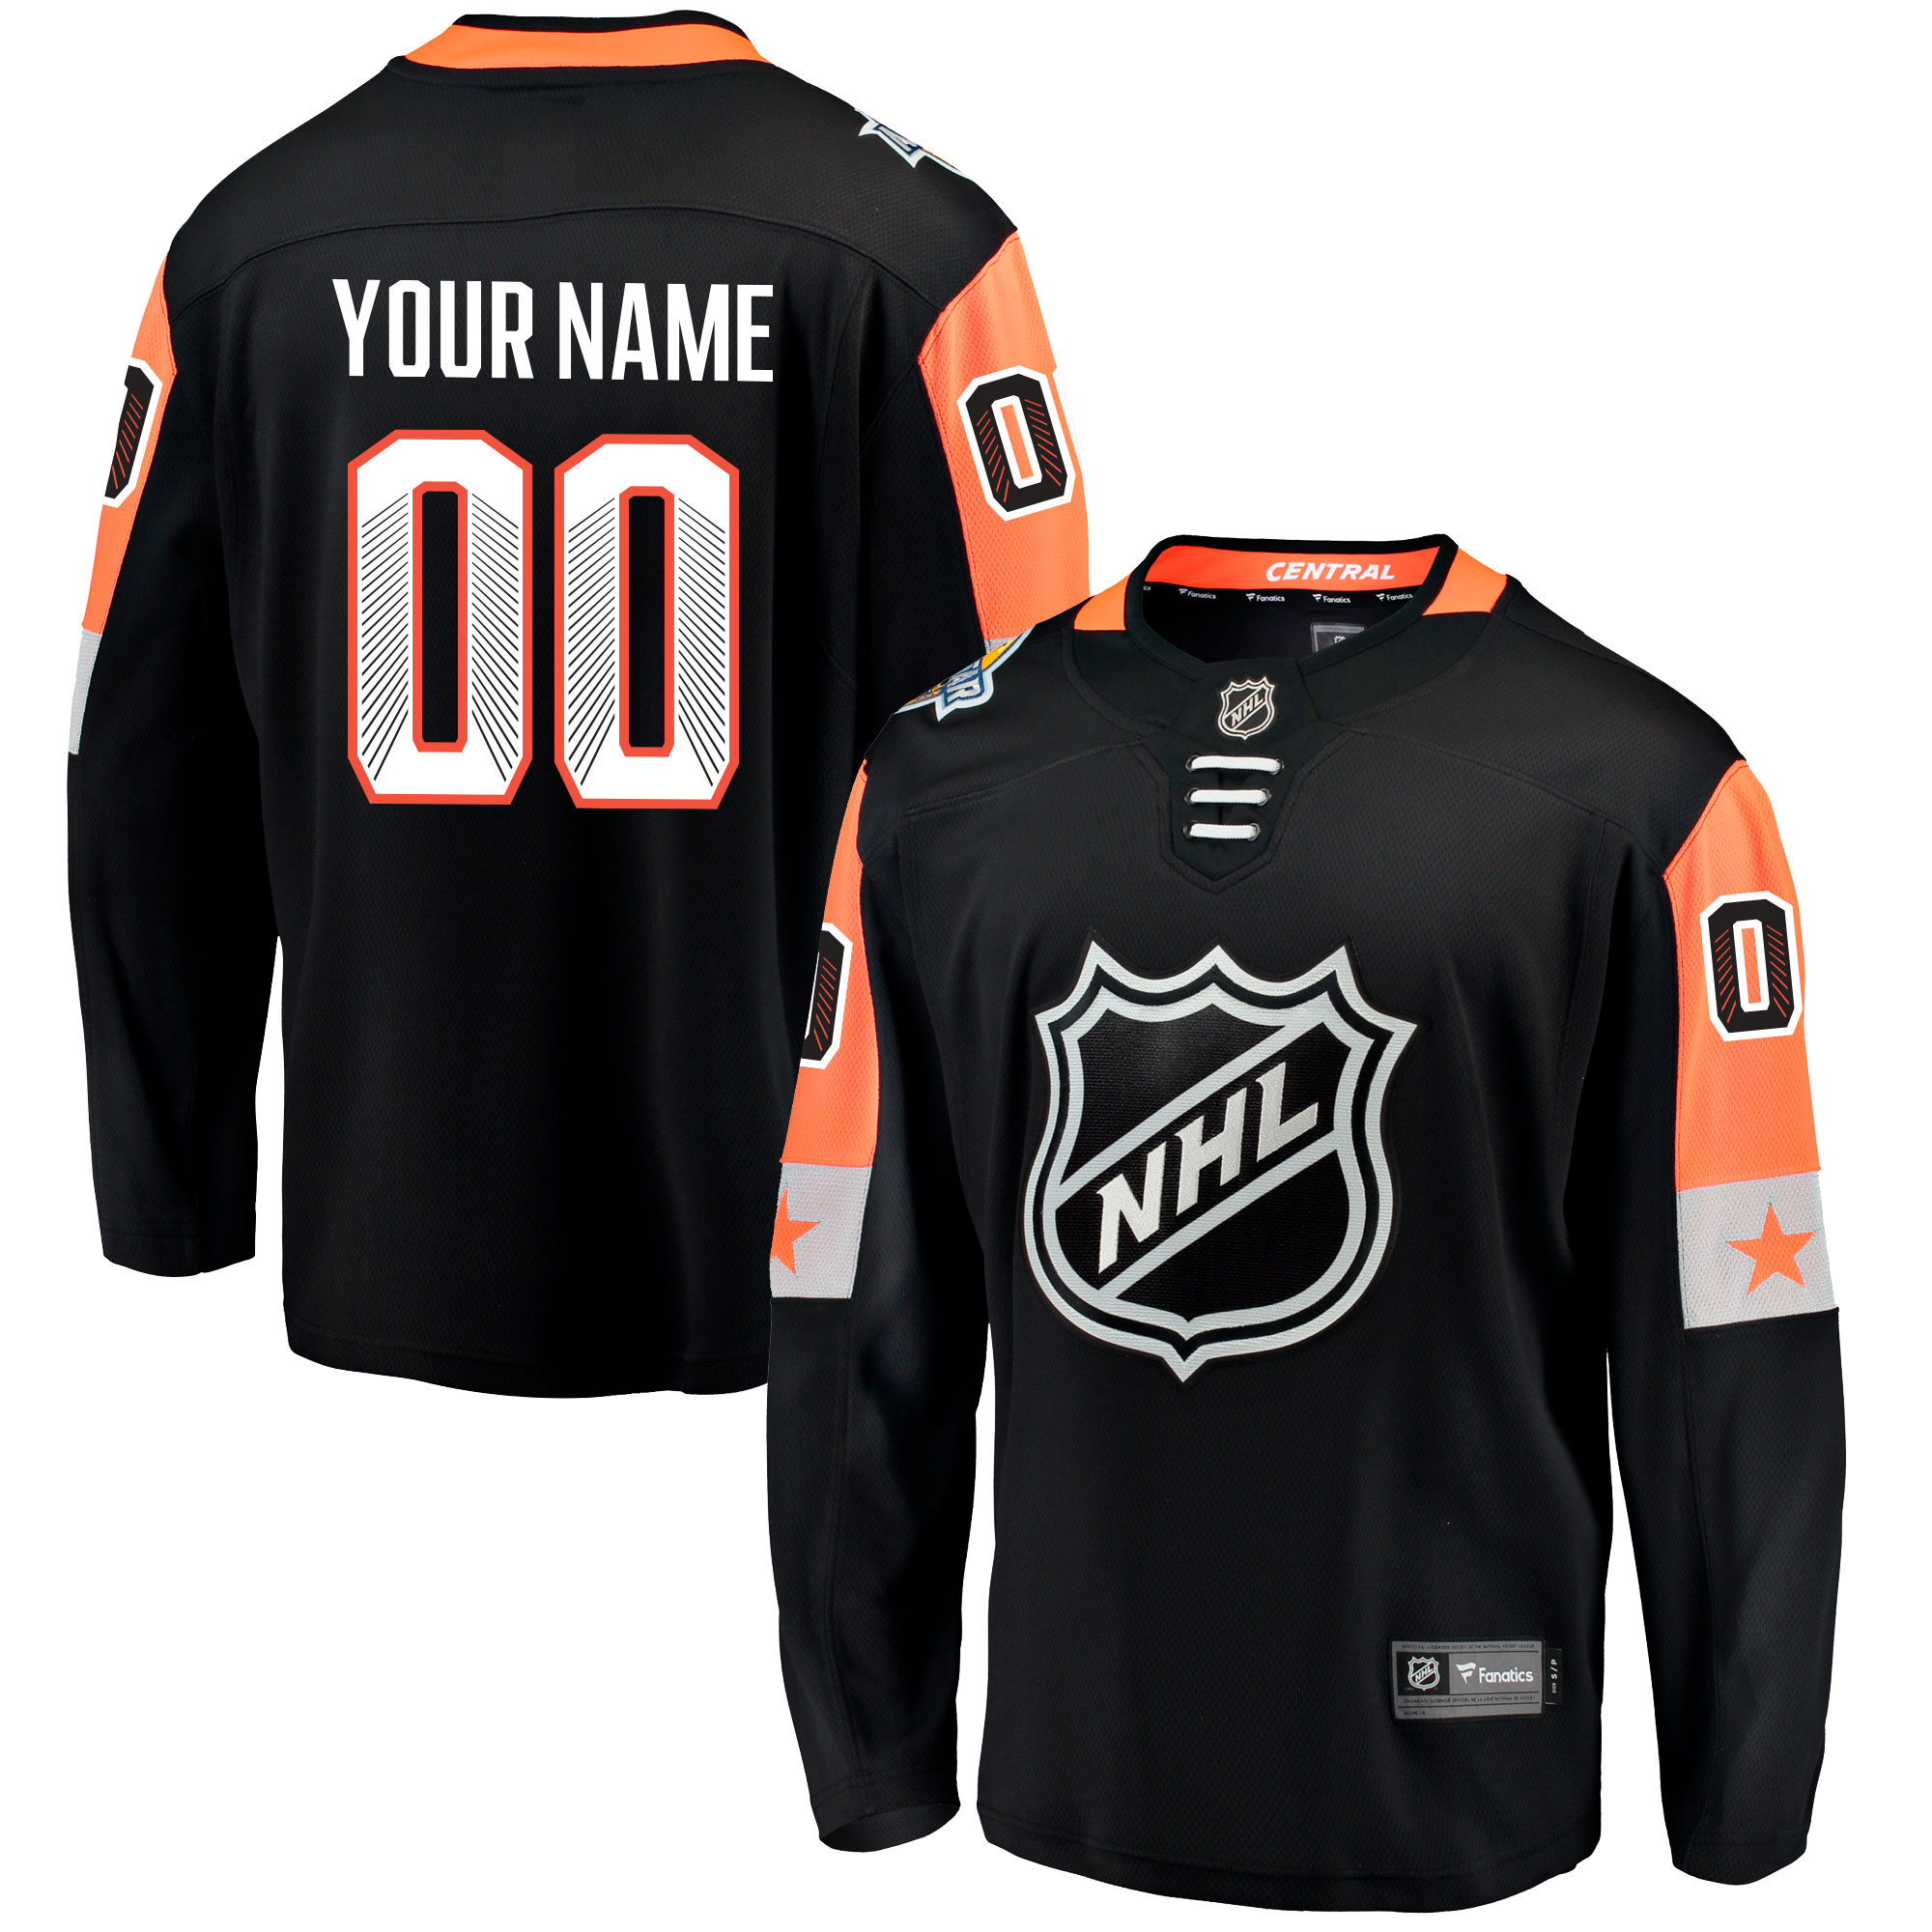 Mens NHL Central Division All Star Fanatics Branded Breakaway Jersey Customised->customized nhl jersey->Custom Jersey